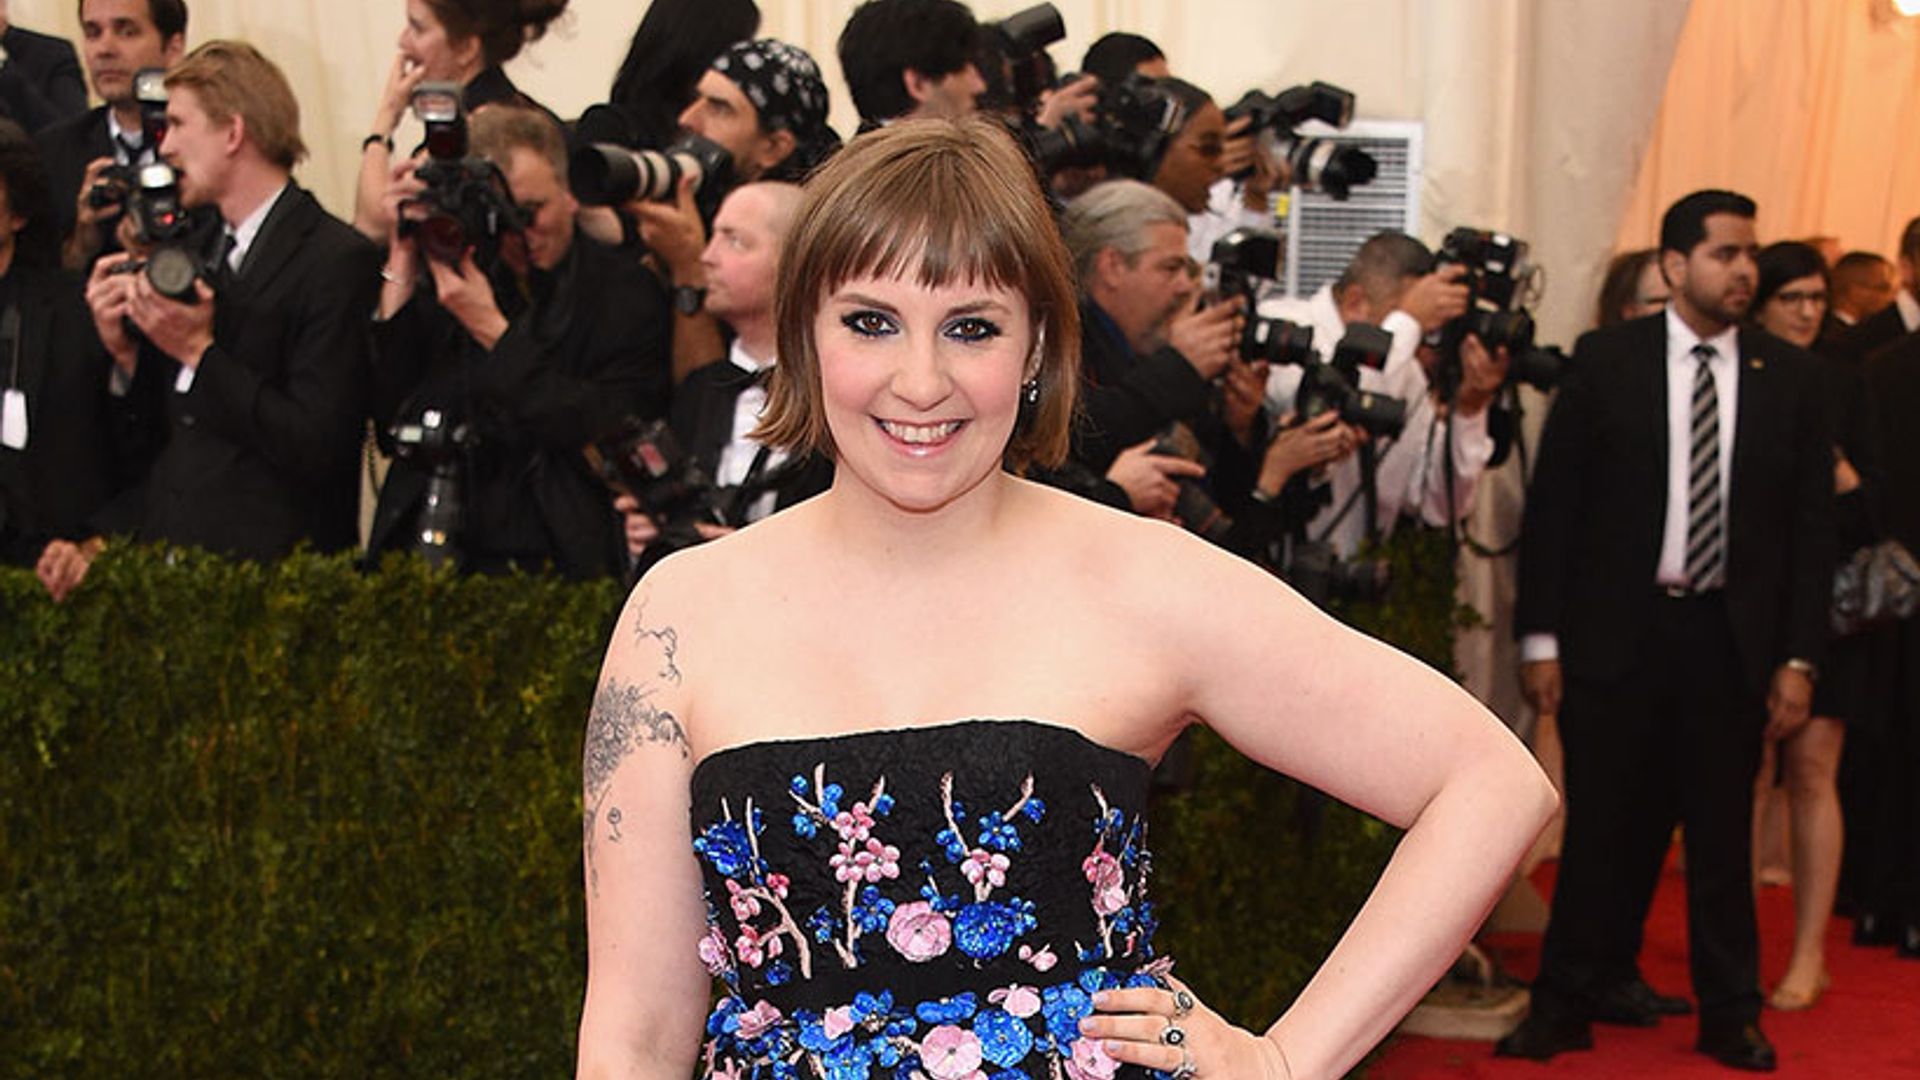 Lena Dunham surprises with new hair look – see the snap!